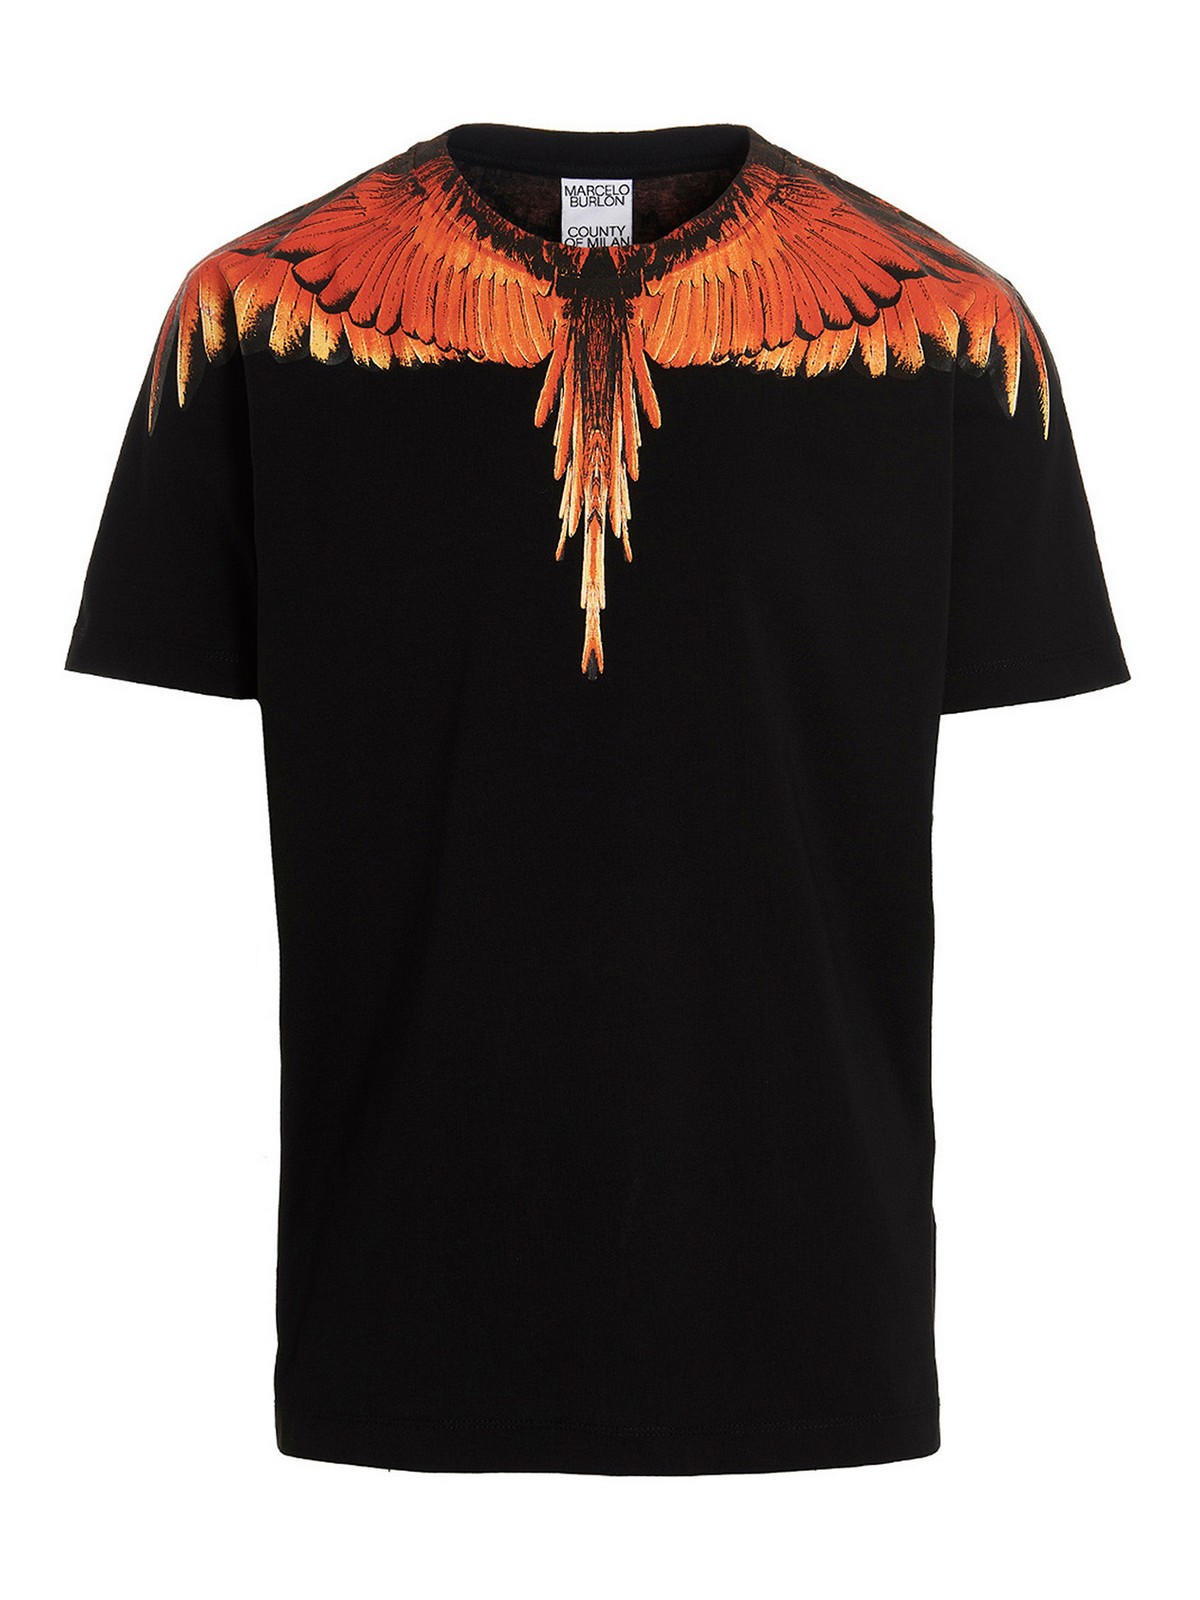 Verwijdering Tussen Christian T-shirts Marcelo Burlon County Of Milan - Icon wings t-shirt -  CMAA018F22JER0011026